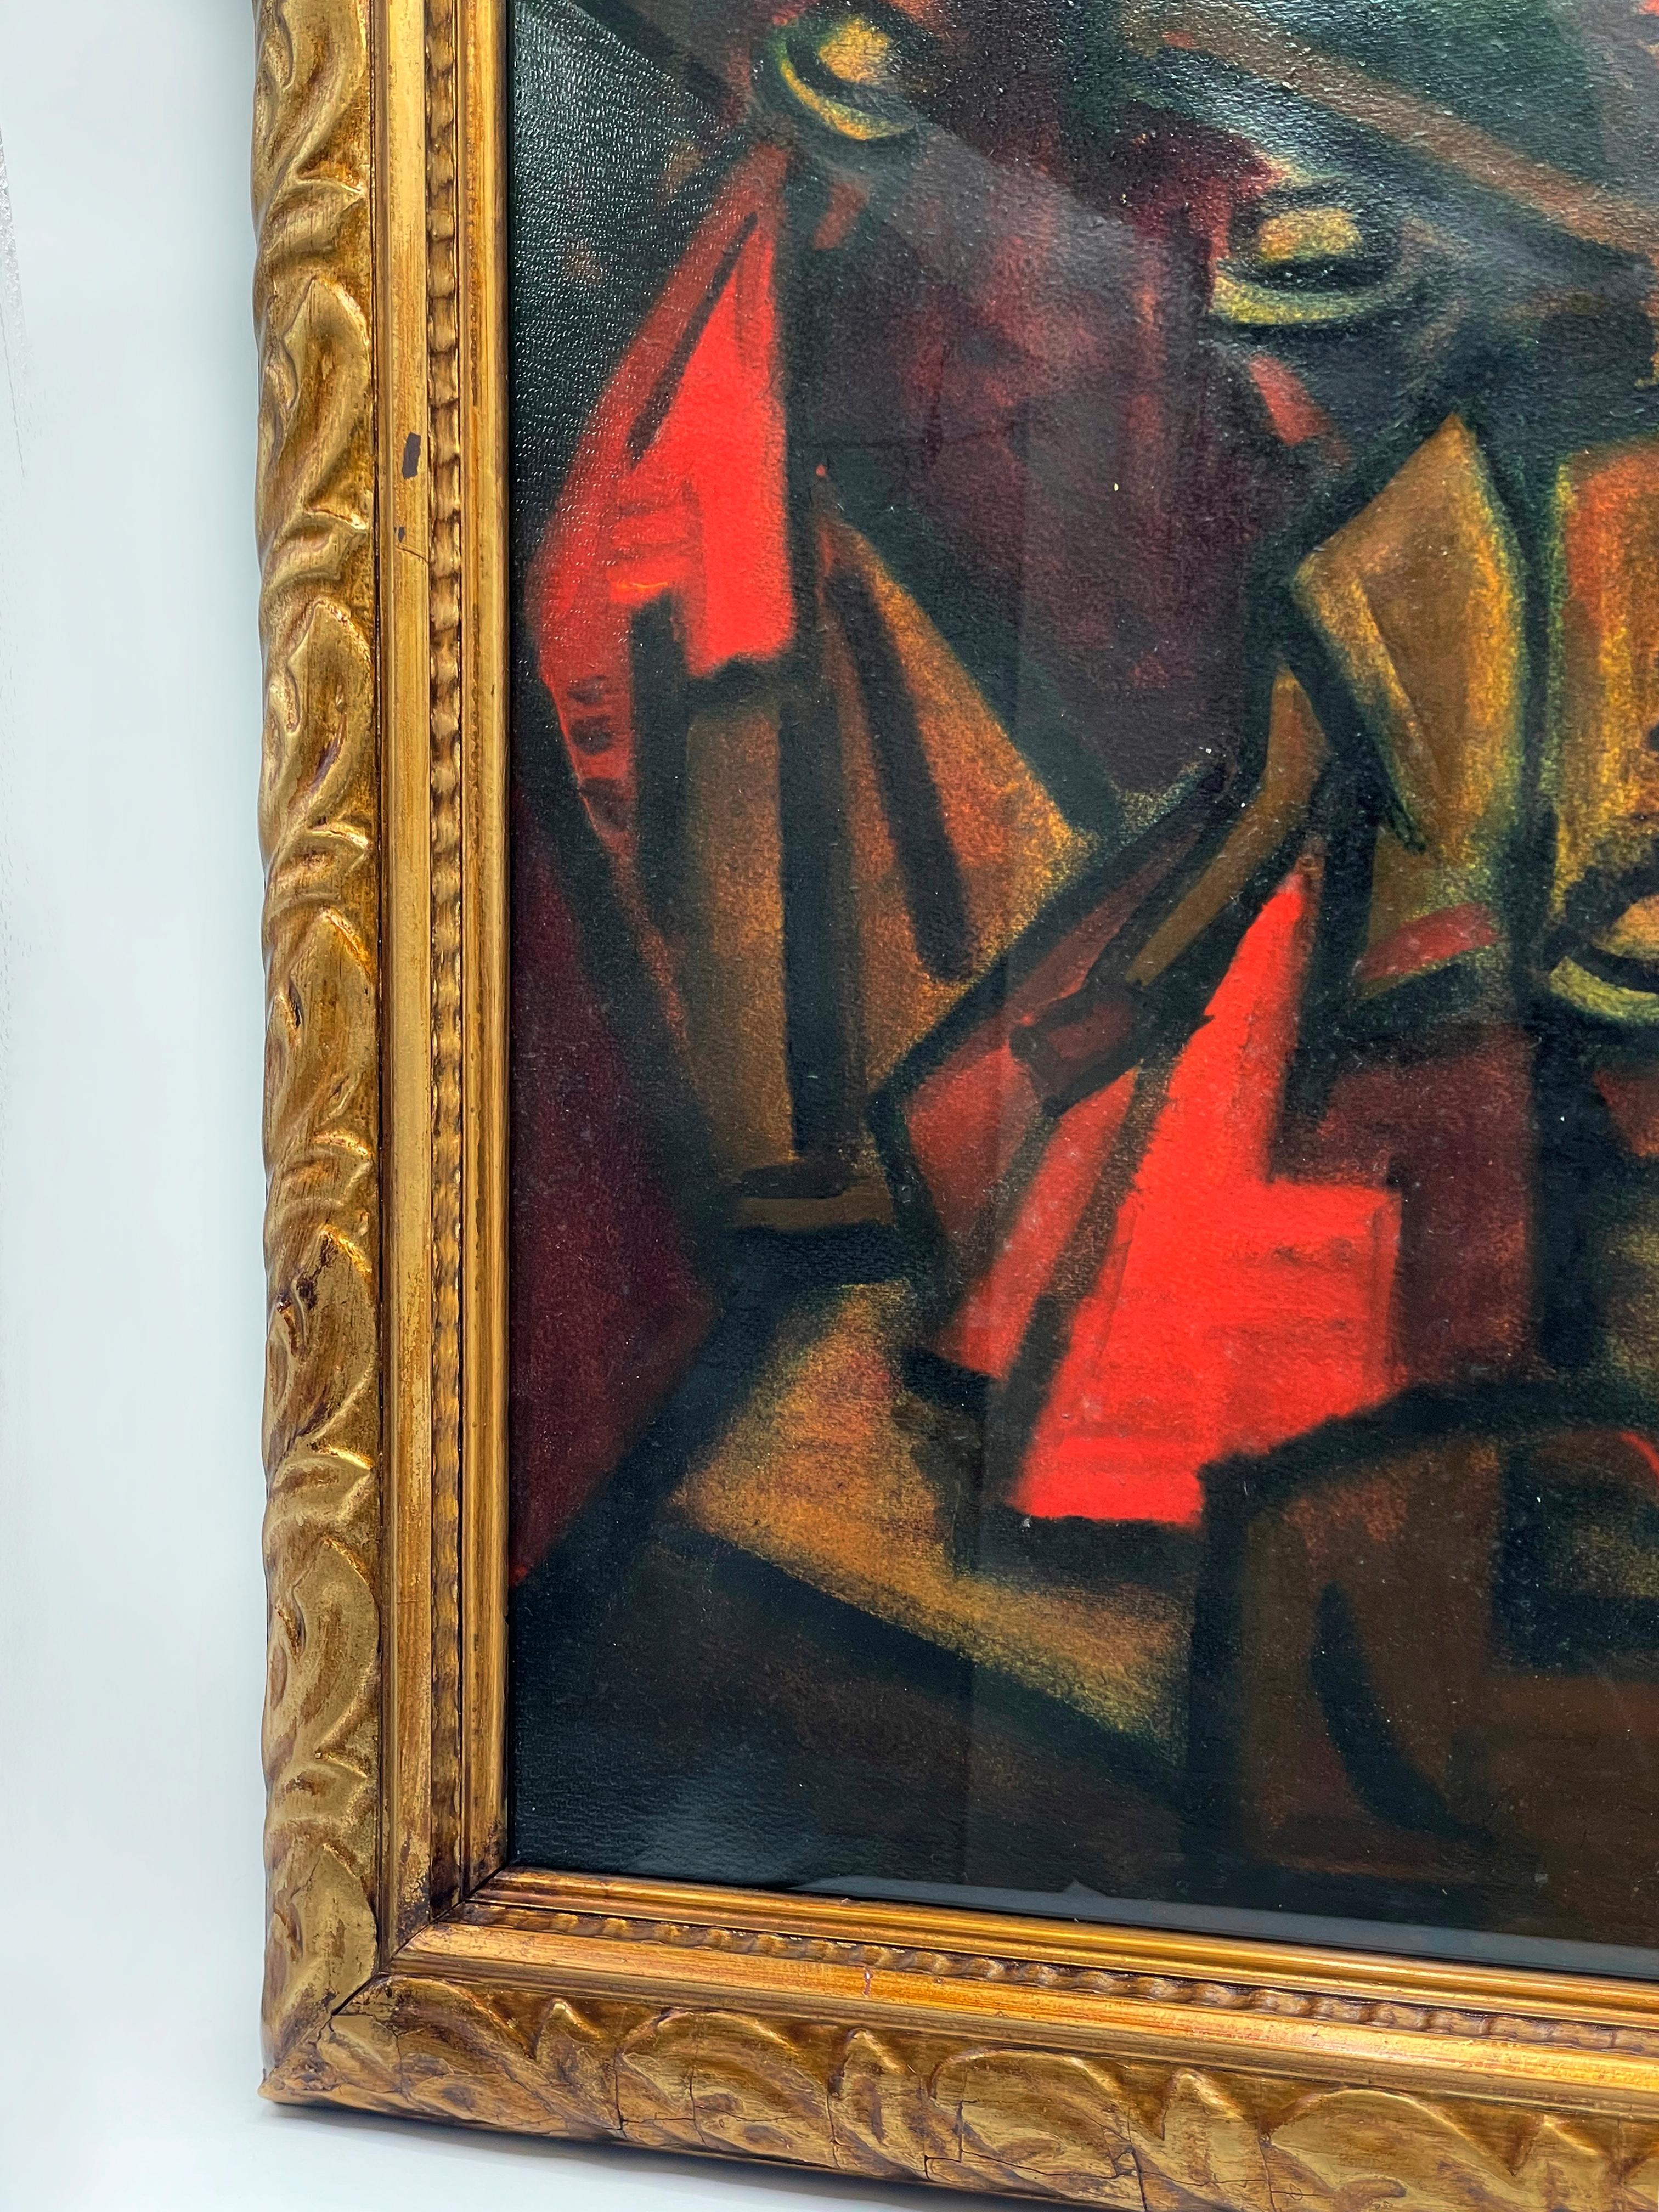 Juan Rimsa (Argentina, 1903-1978)
Abstract landscape Painting Seated Womens, oil on paper, signed J.Rimsa around the 1950s
Mounted in classic frame.

Frame: Height: 61 / Width: 53
Image: Height: 39 /Width: 39,5

